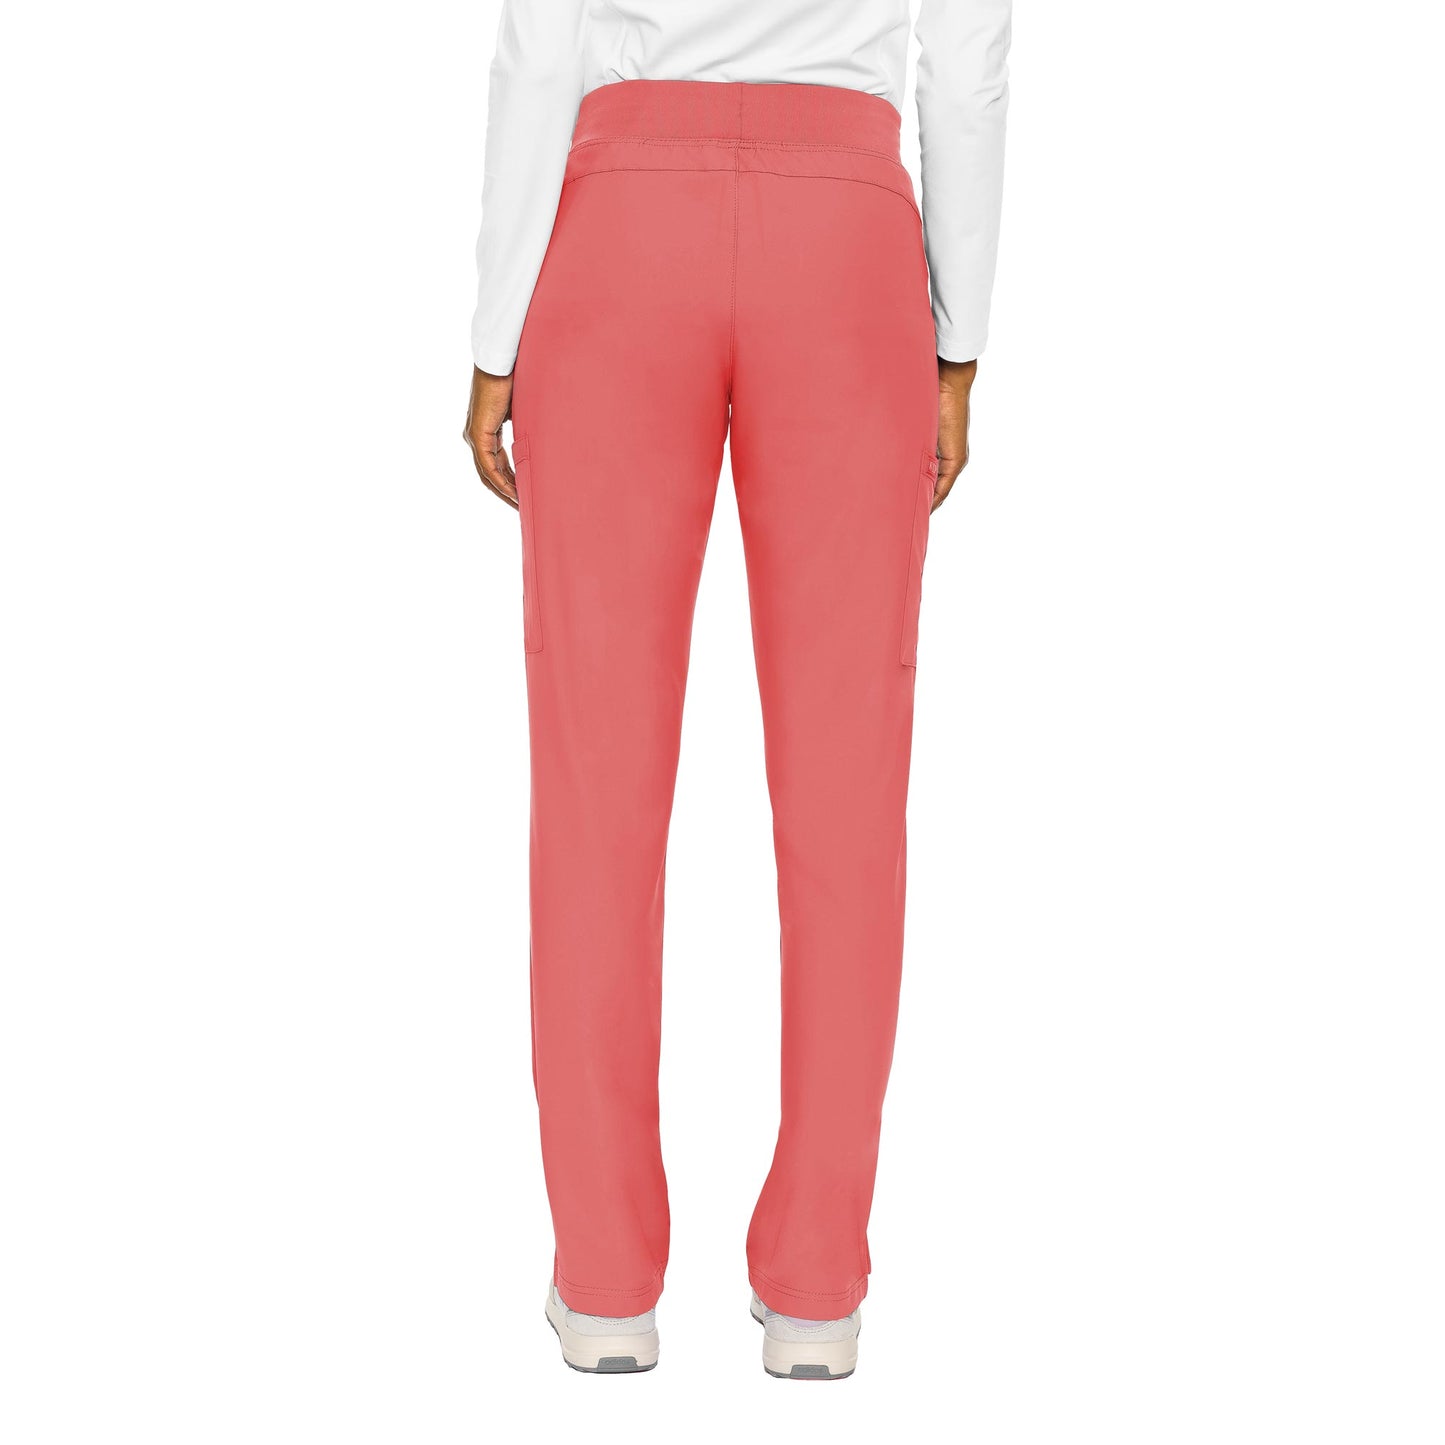 Med Couture Insight Zipper Pant Tall (XS-XL)